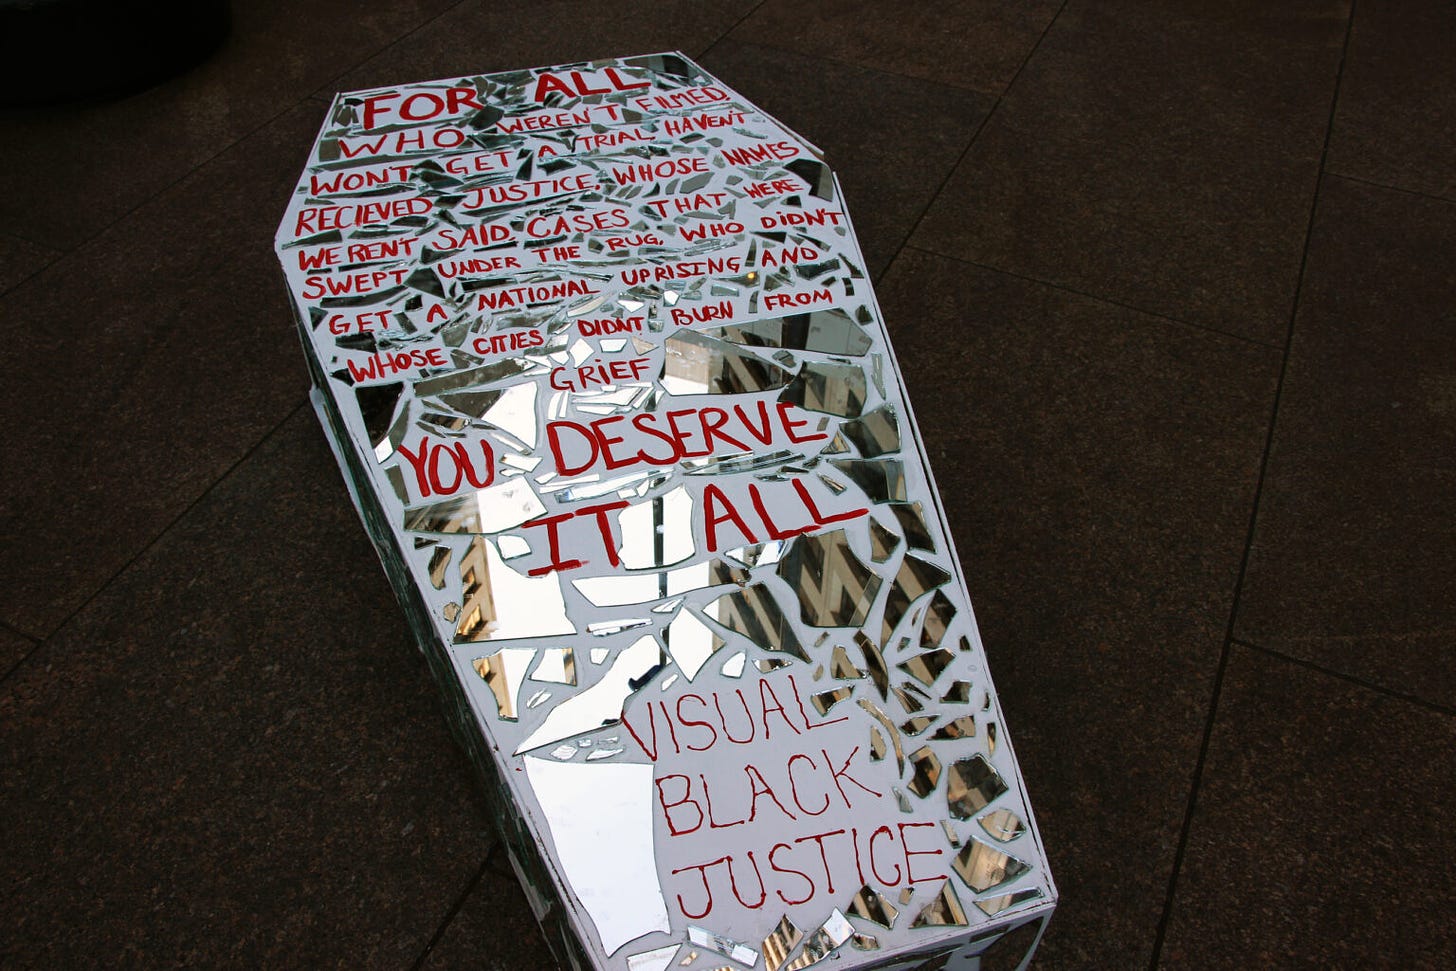 a white coffin lined with shattered mirrors and red handwriting reads: "“For all who weren’t filmed won’t get a trial haven’t received justice whose names weren’t said cases that were swept under the rug who didn’t get a national uprising and whose cities didn’t burn from grief you deserve it all VISUAL BLACK JUSTICE"